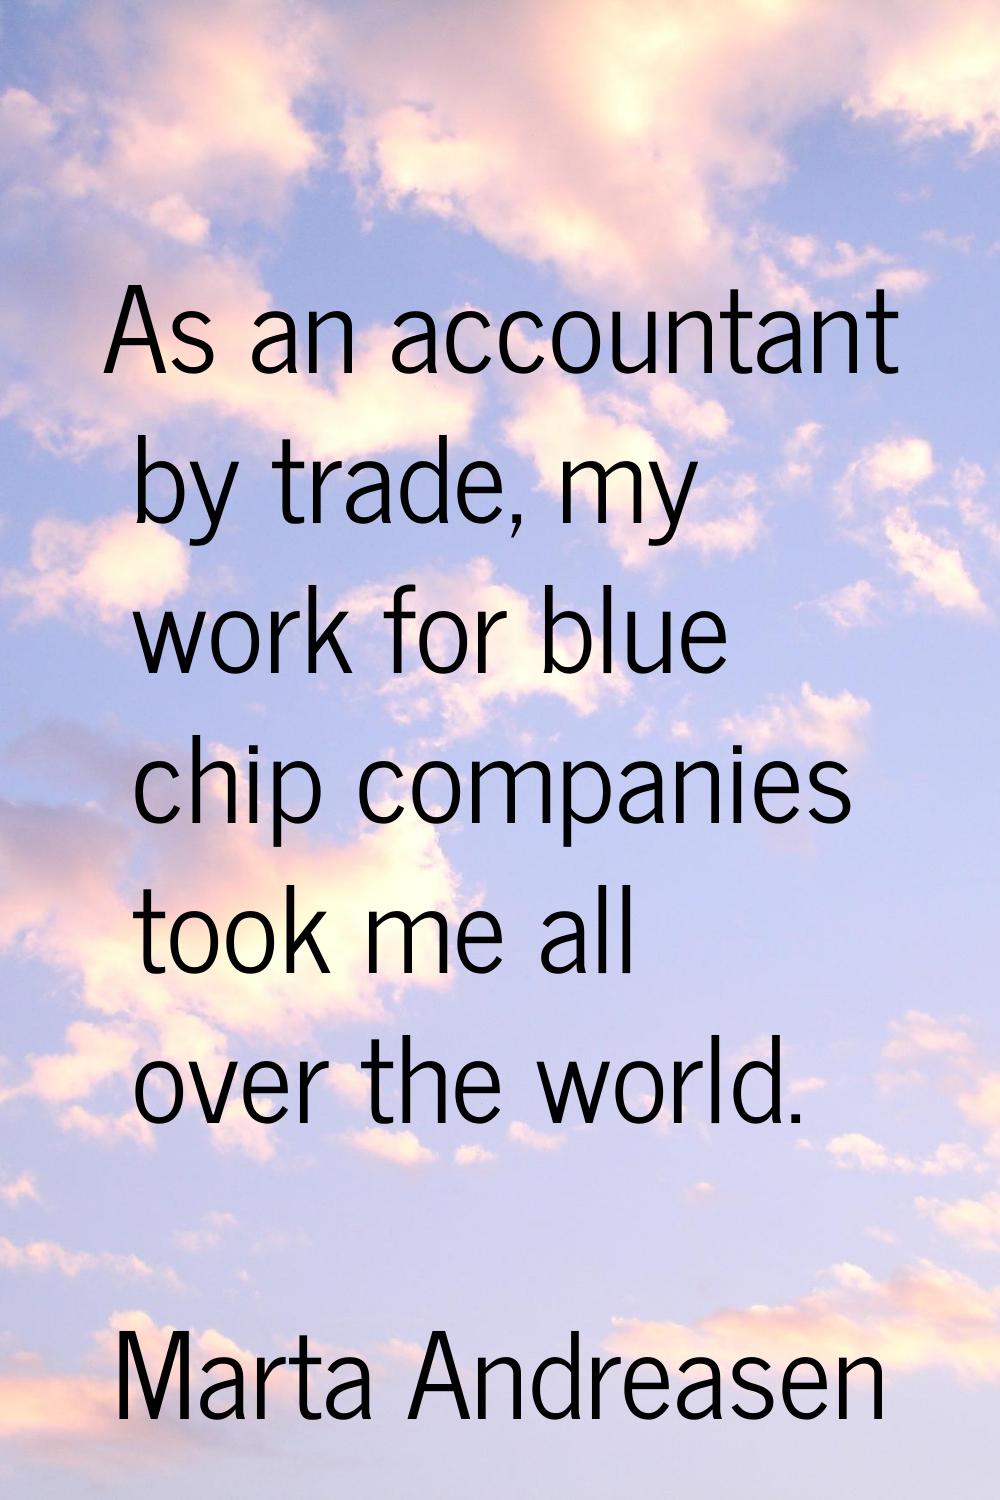 As an accountant by trade, my work for blue chip companies took me all over the world.